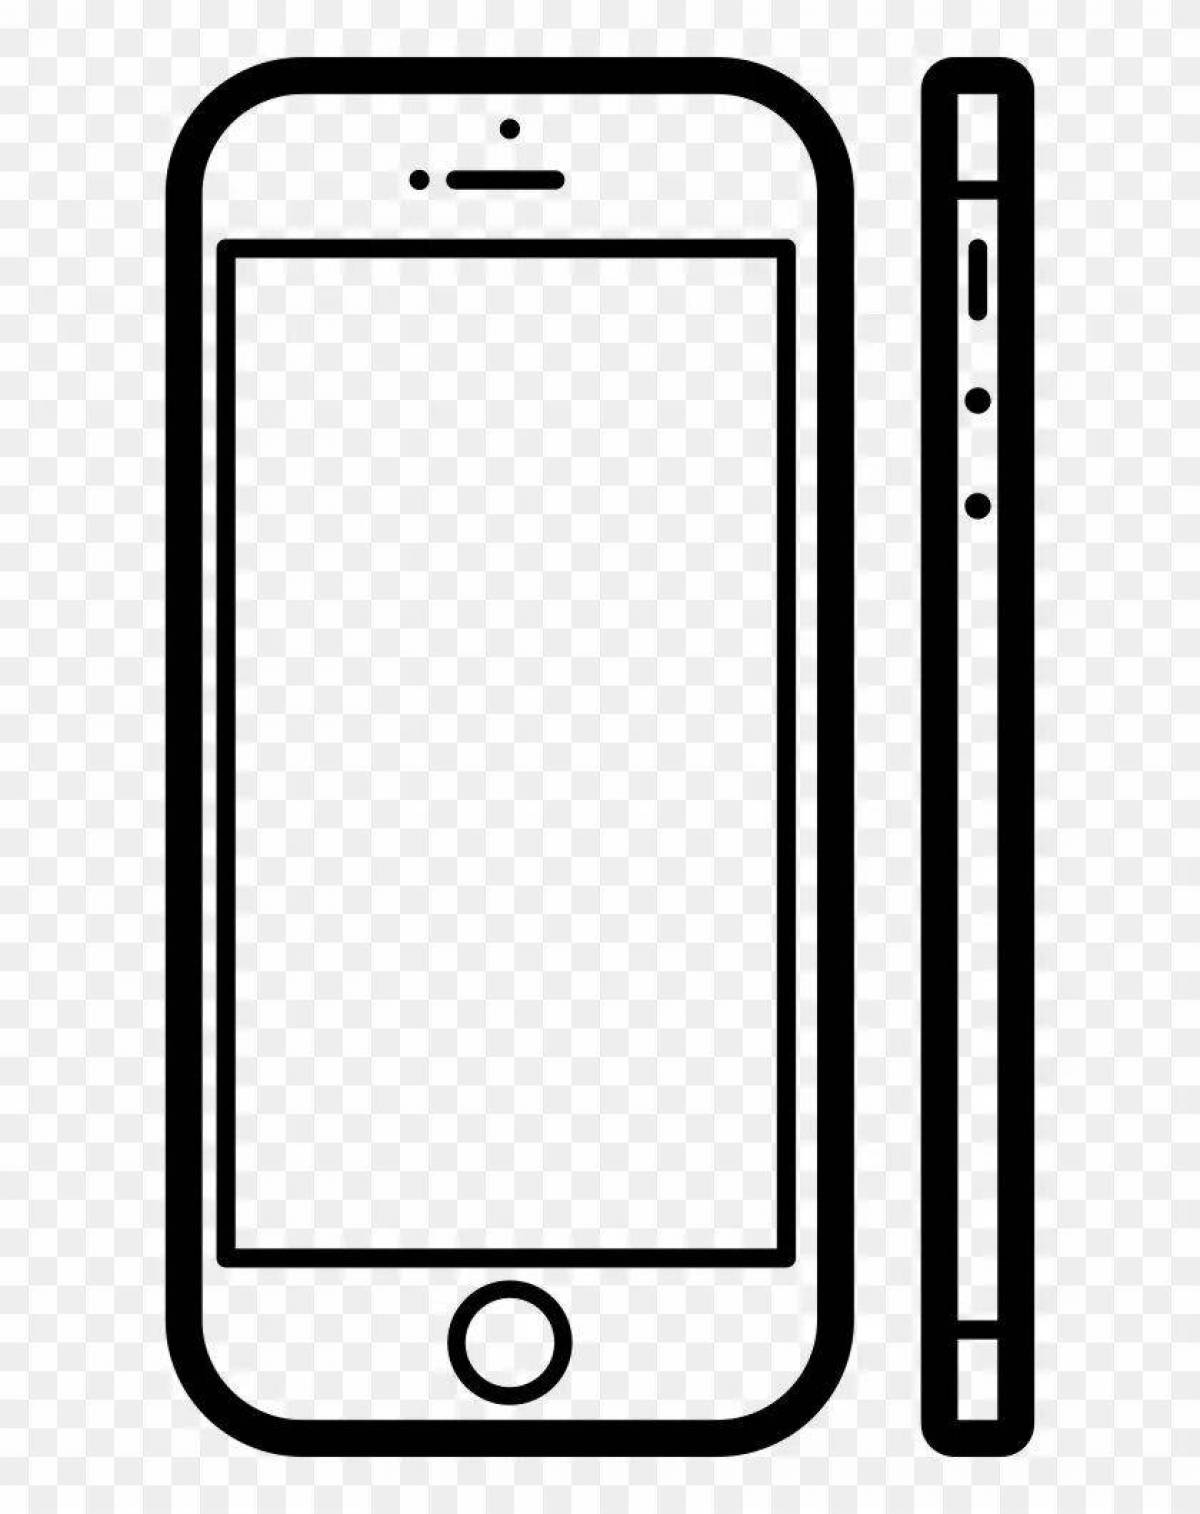 Fun touch screen phone coloring book